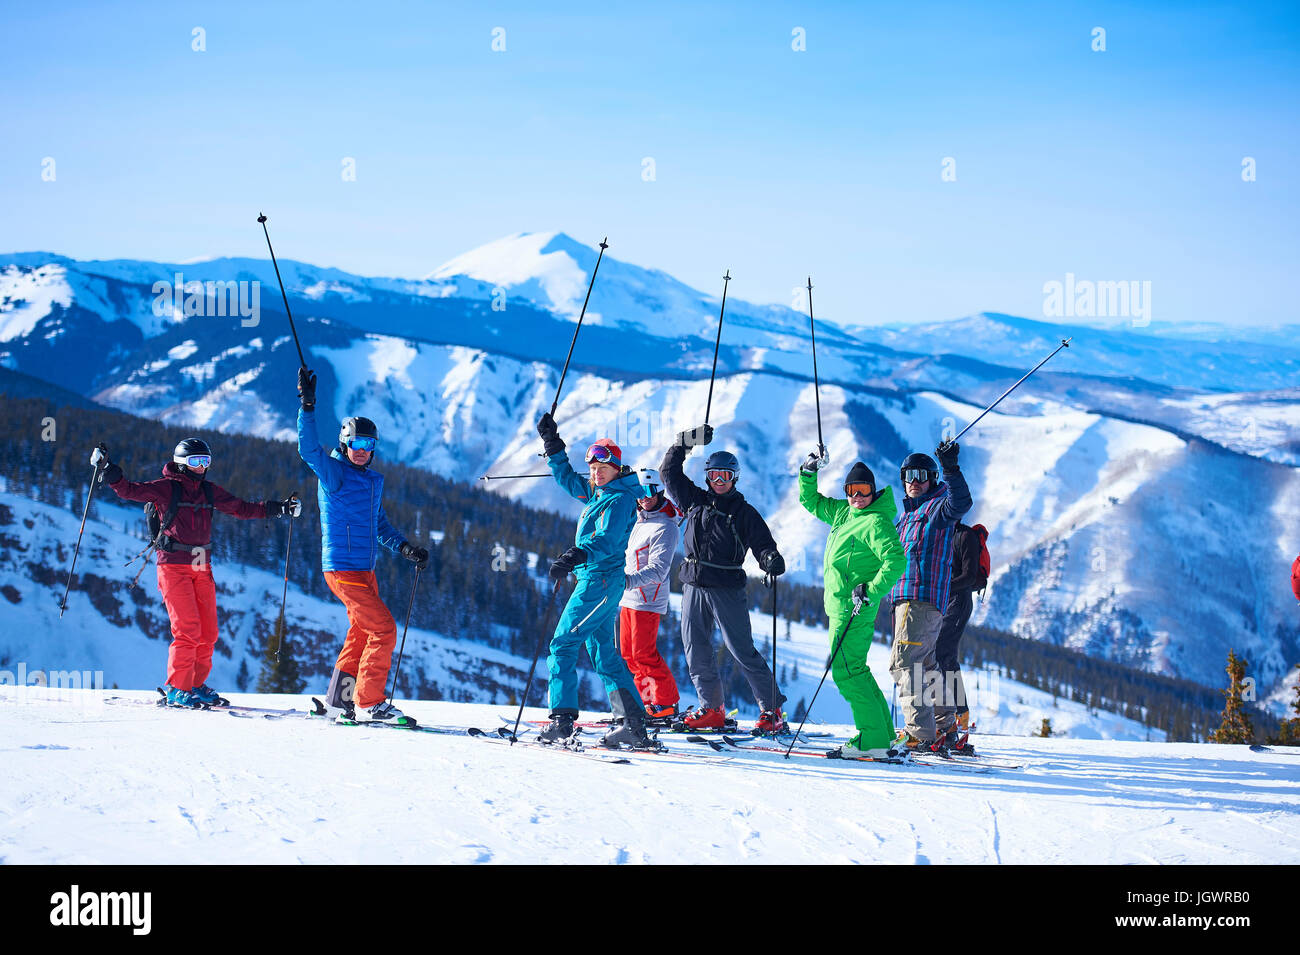 Group portrait of male and female skiers on ski slope, Aspen, Colorado, USA Stock Photo